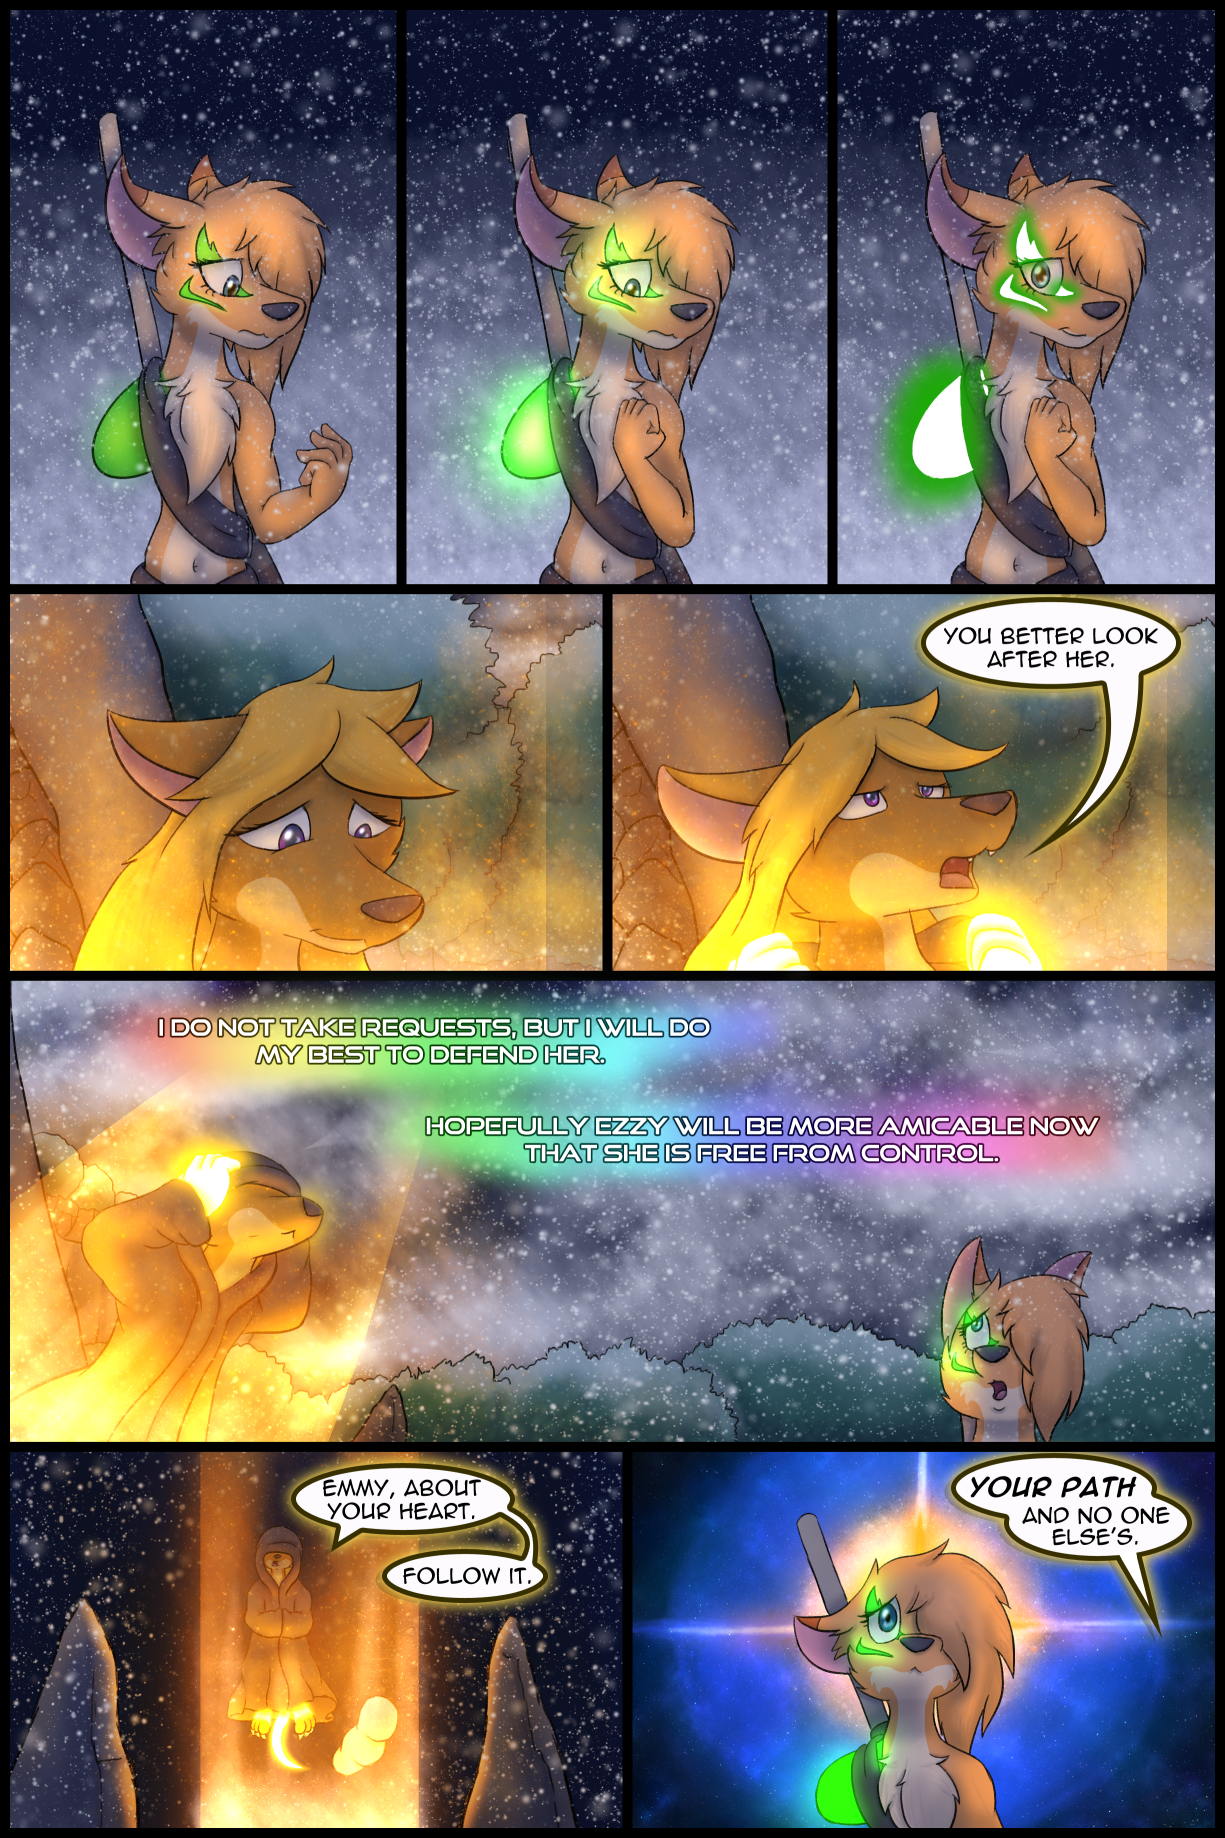 Ch3 Page 14 – Follow Your Path